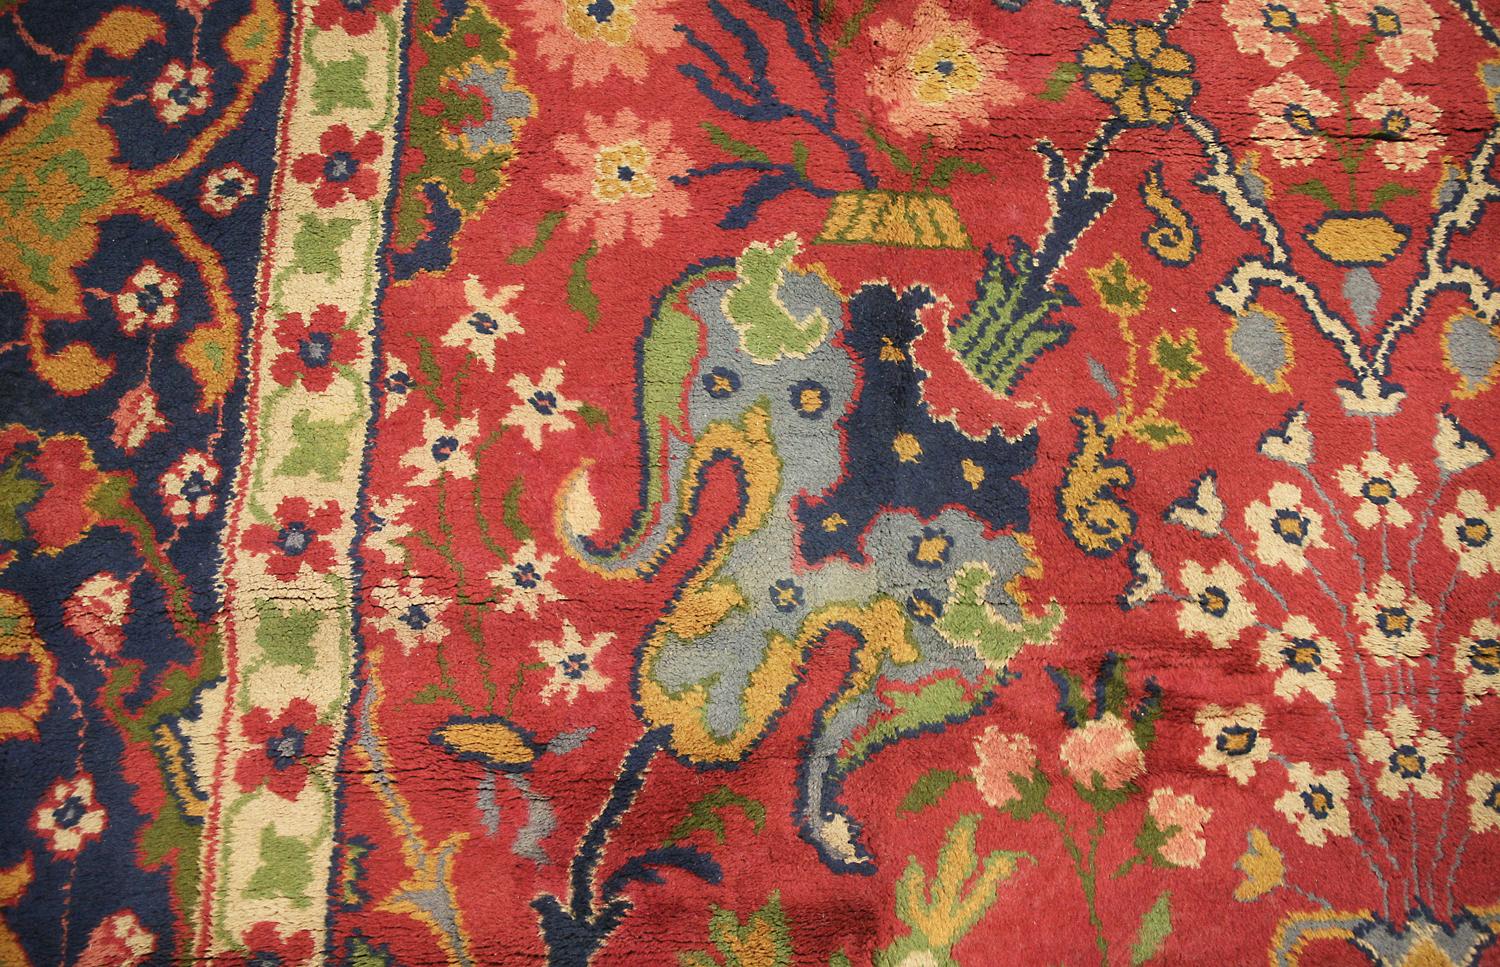 Other Circa 1920 Oversized Antique English Wool Donegal Carpet, Red Field For Sale